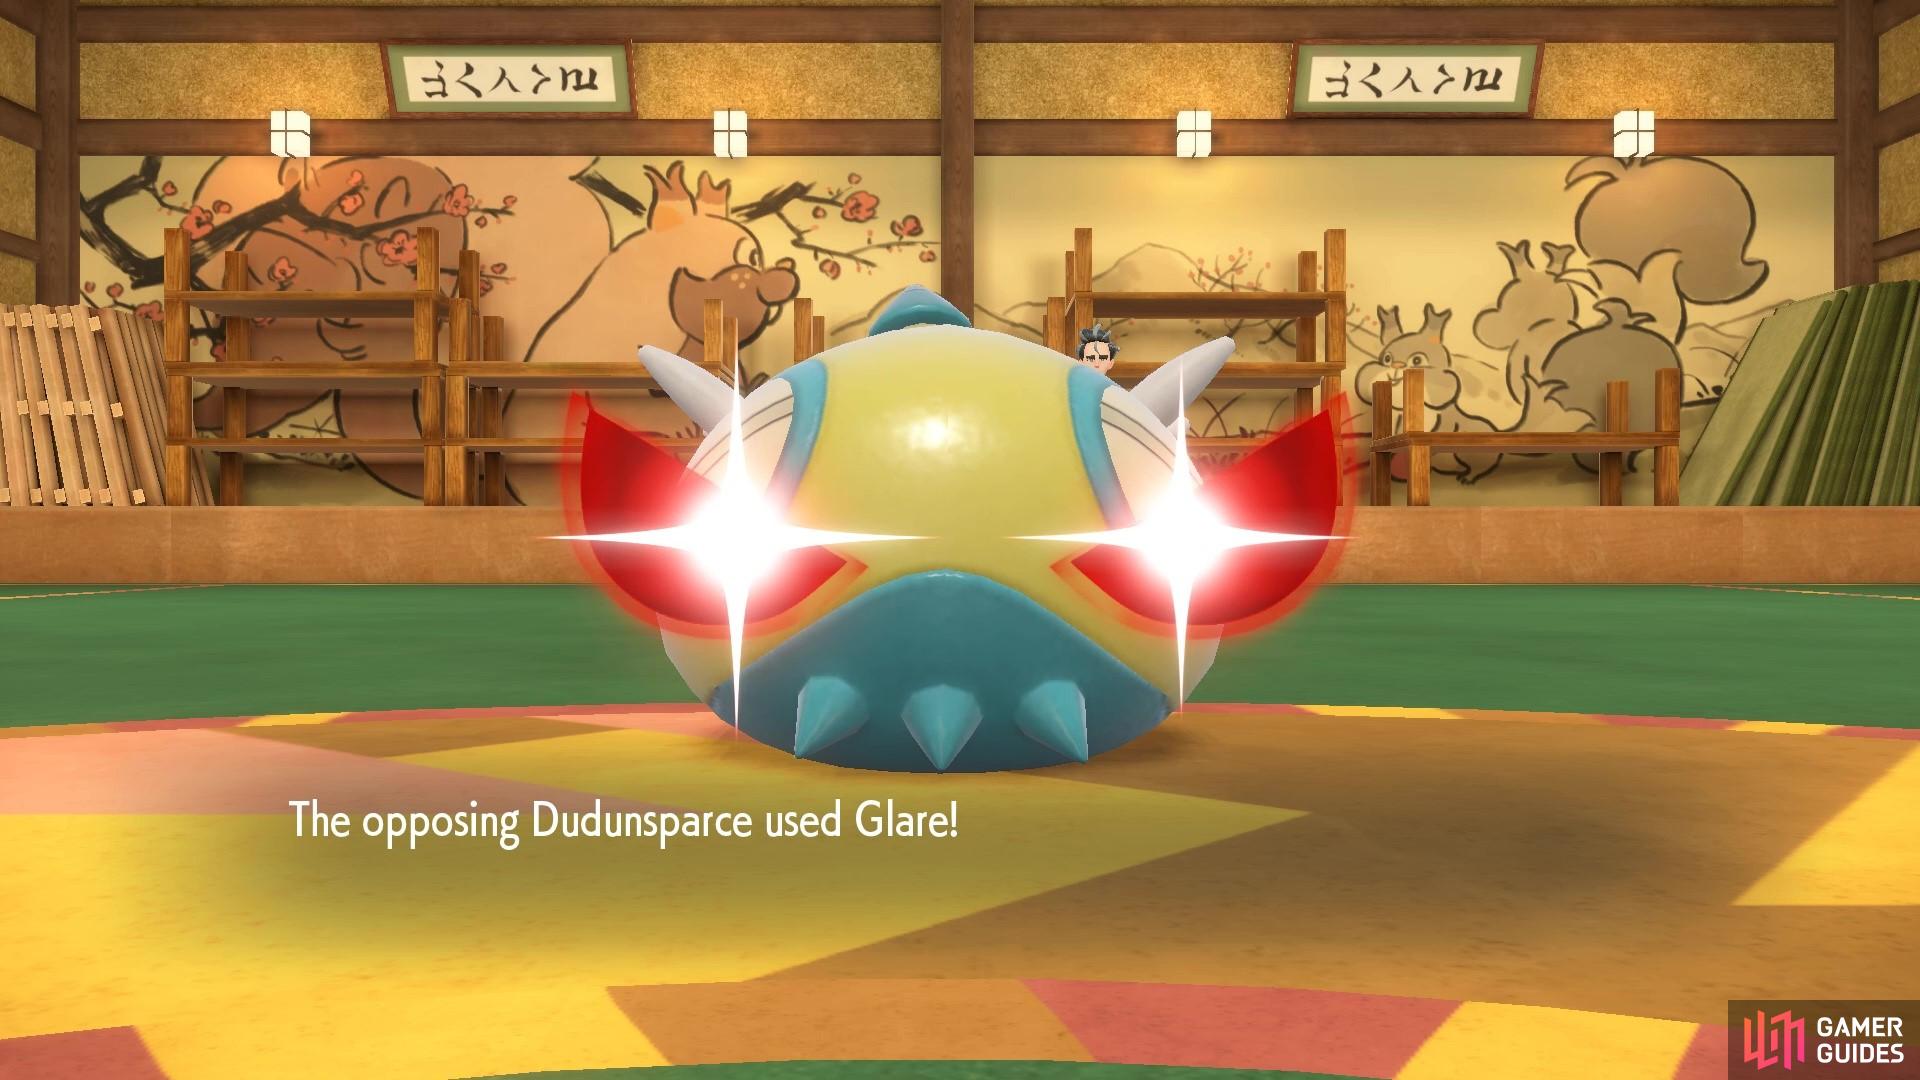 Dudunsparce will threaten you with his scary Glare!